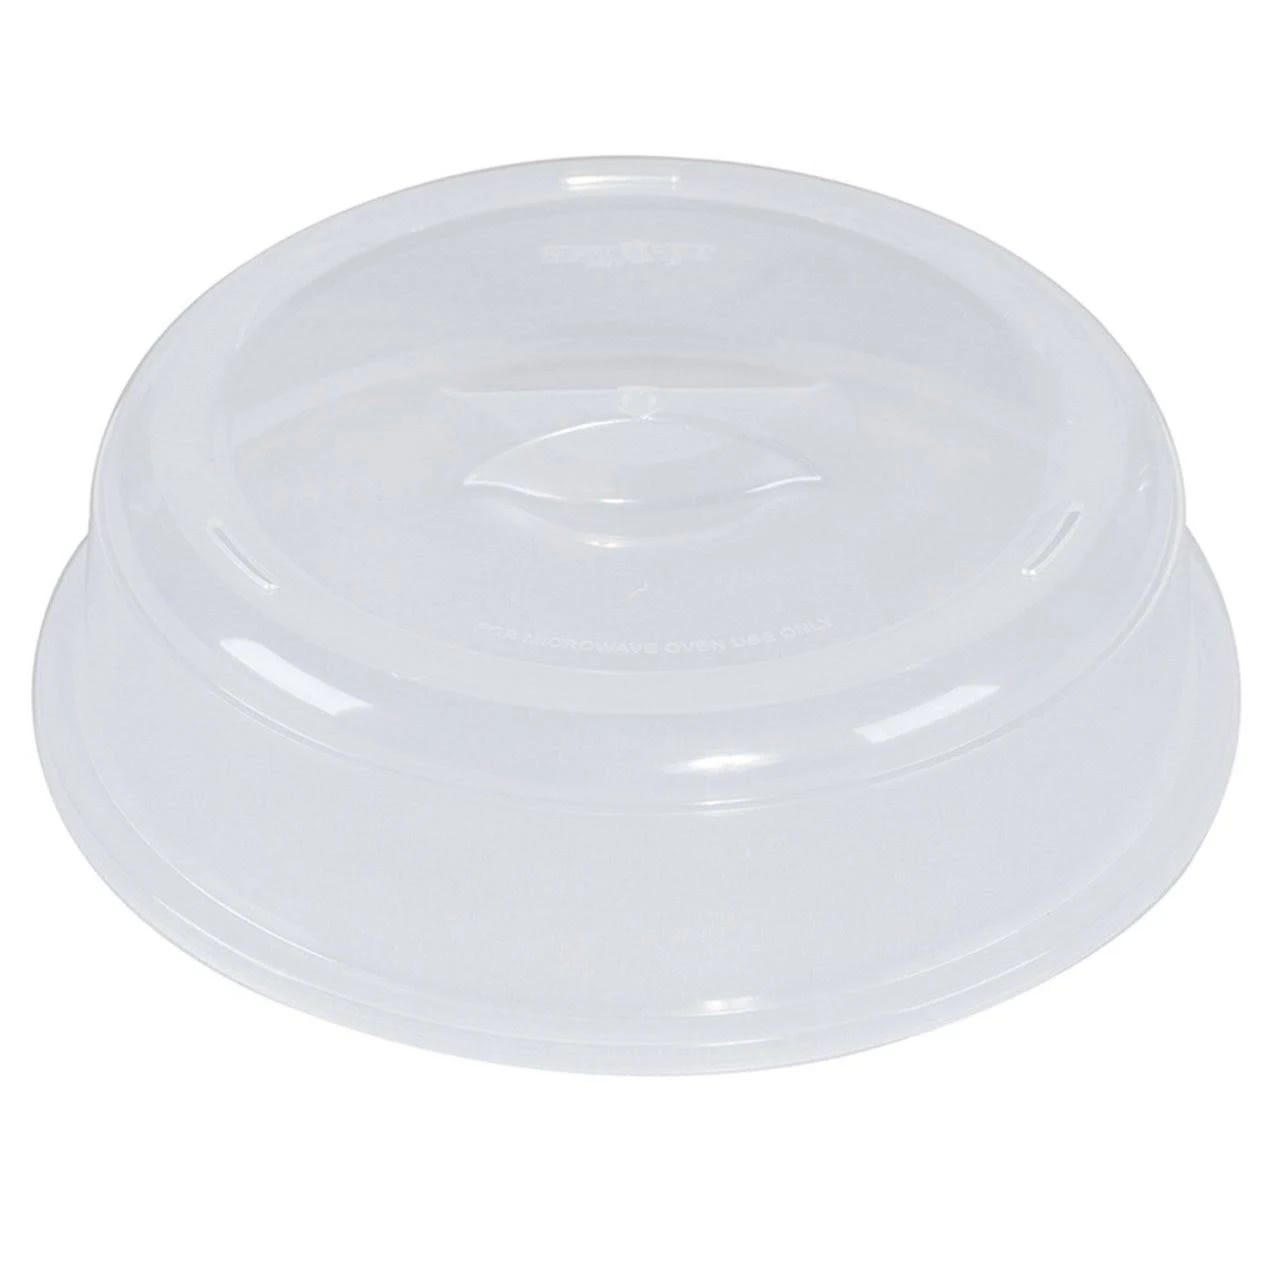 Nordic Ware Microwave Plate Cover - 10-Inch Spatter Guard | Image